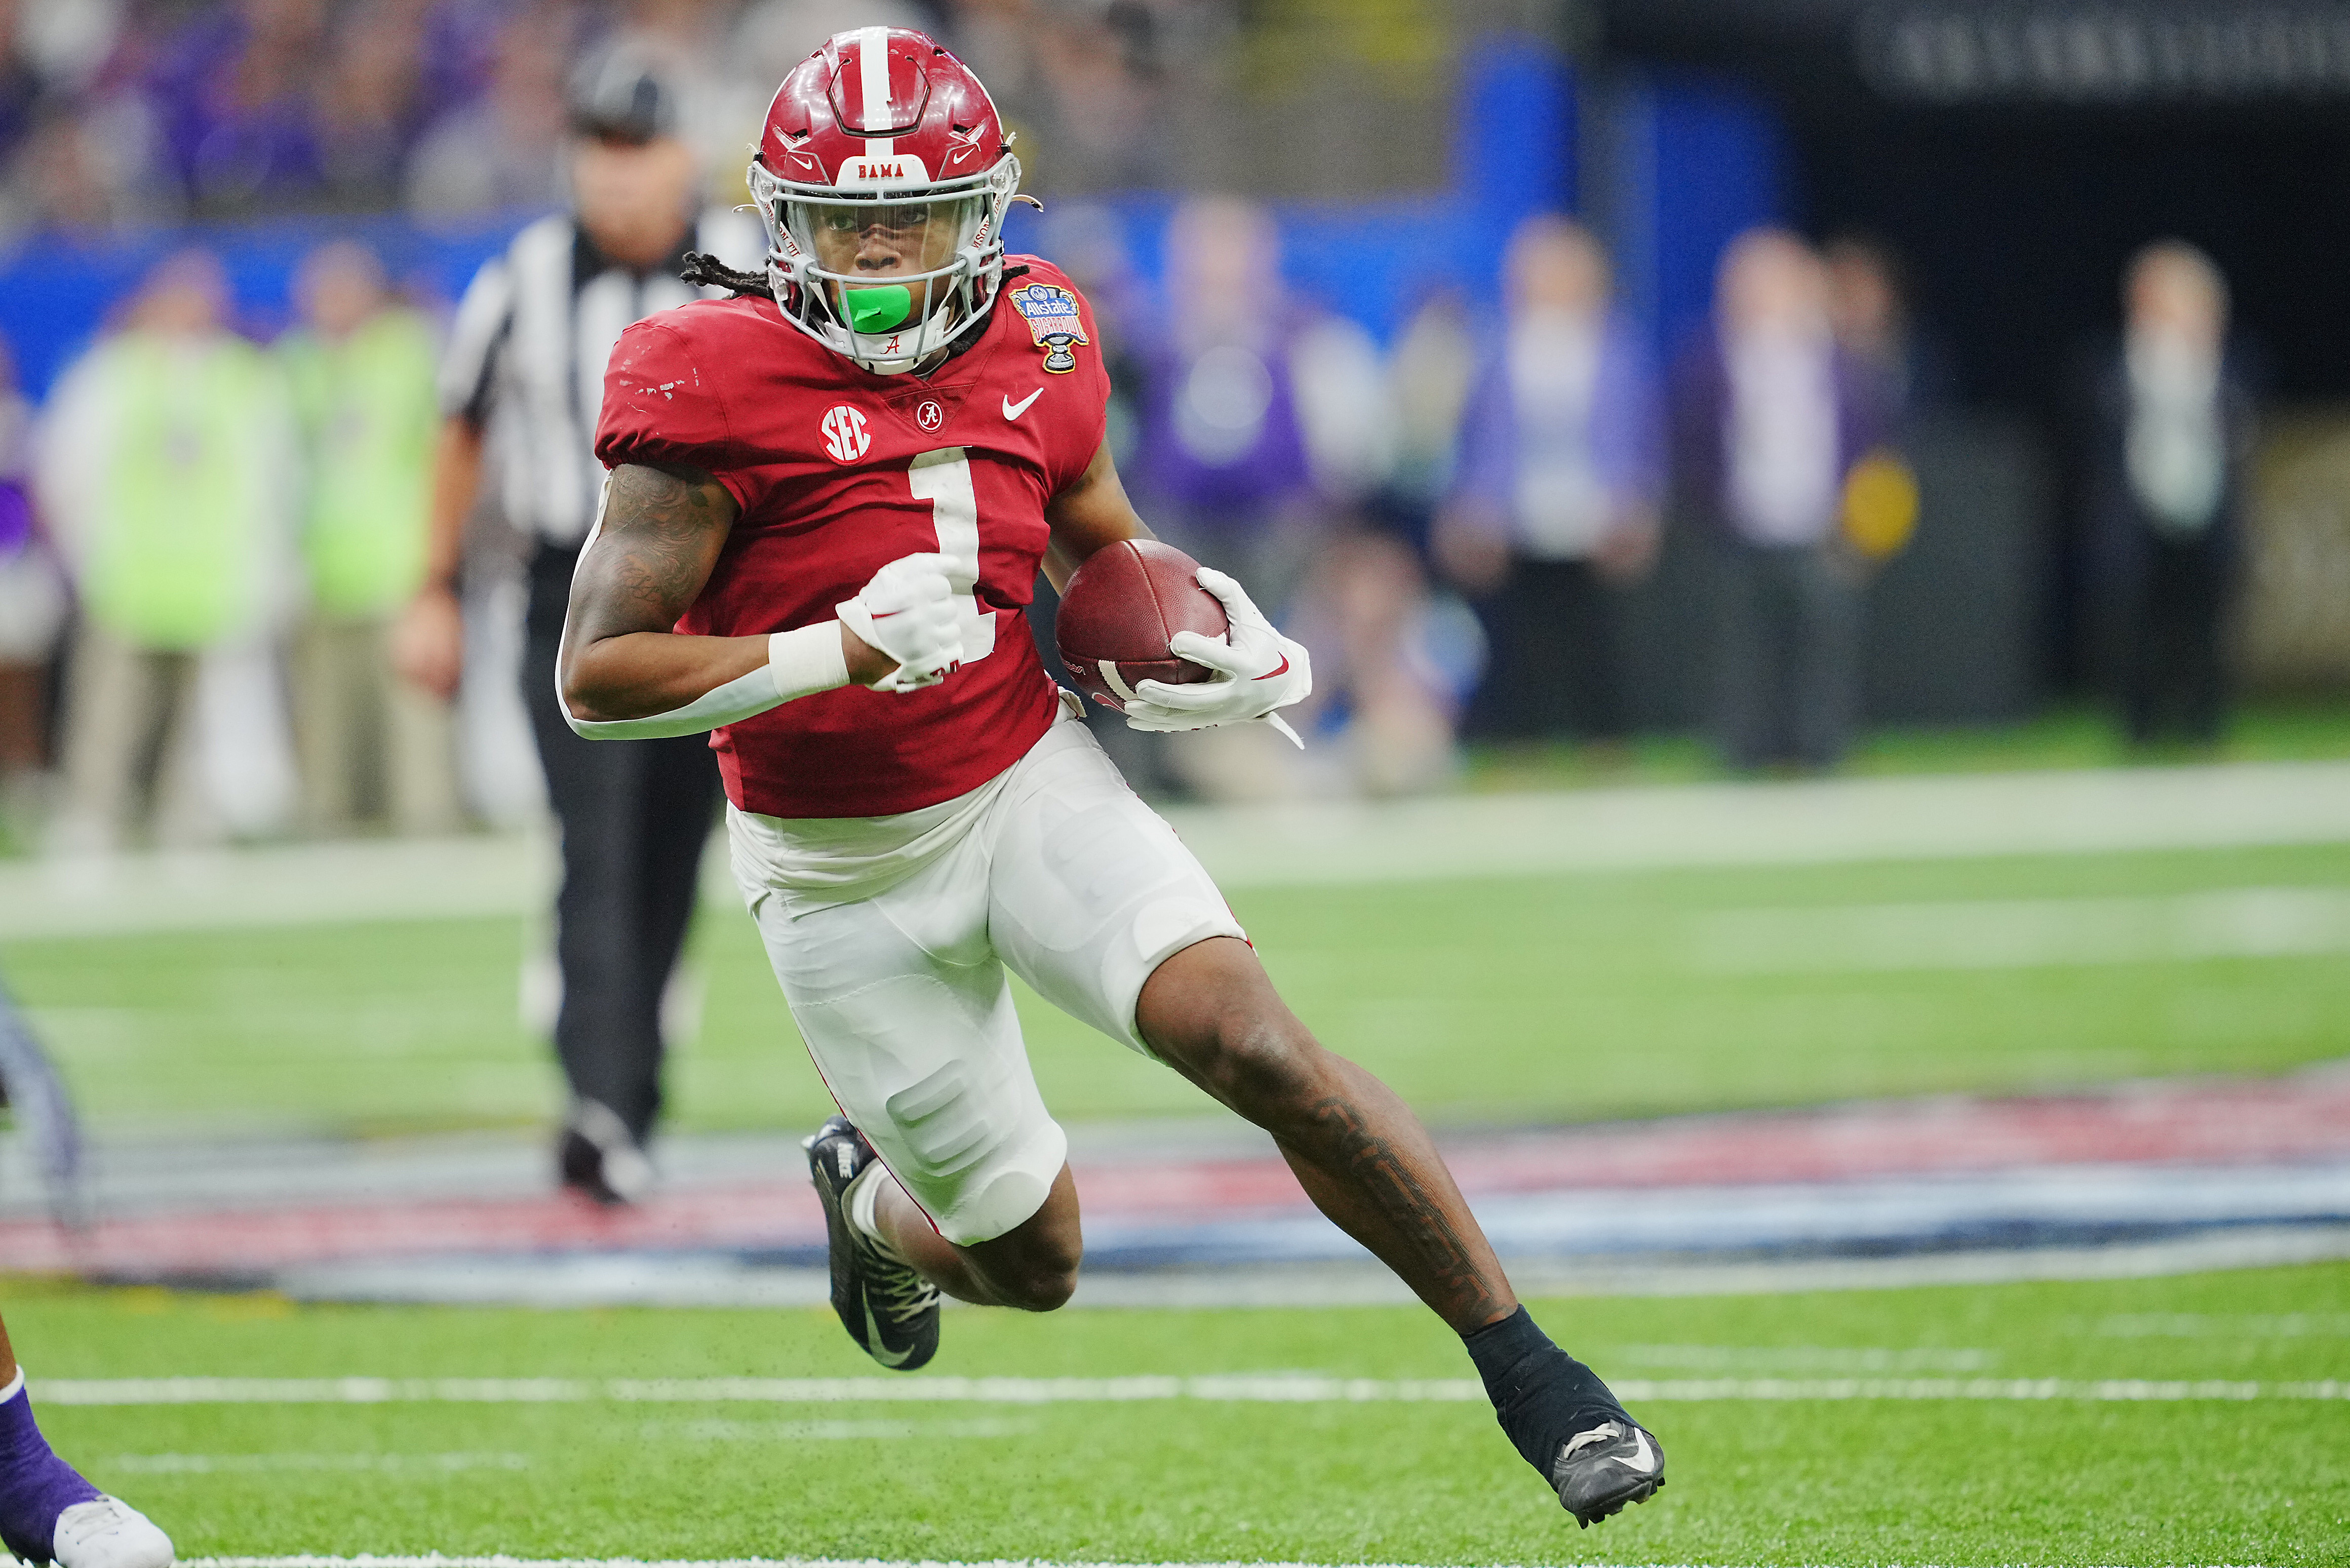 Dec 31, 2022; New Orleans, LA, USA; Alabama Crimson Tide running back Jahmyr Gibbs (1) runs the ball against the Kansas State Wildcats during the second half in the 2022 Sugar Bowl at Caesars Superdome. Mandatory Credit: Andrew Wevers